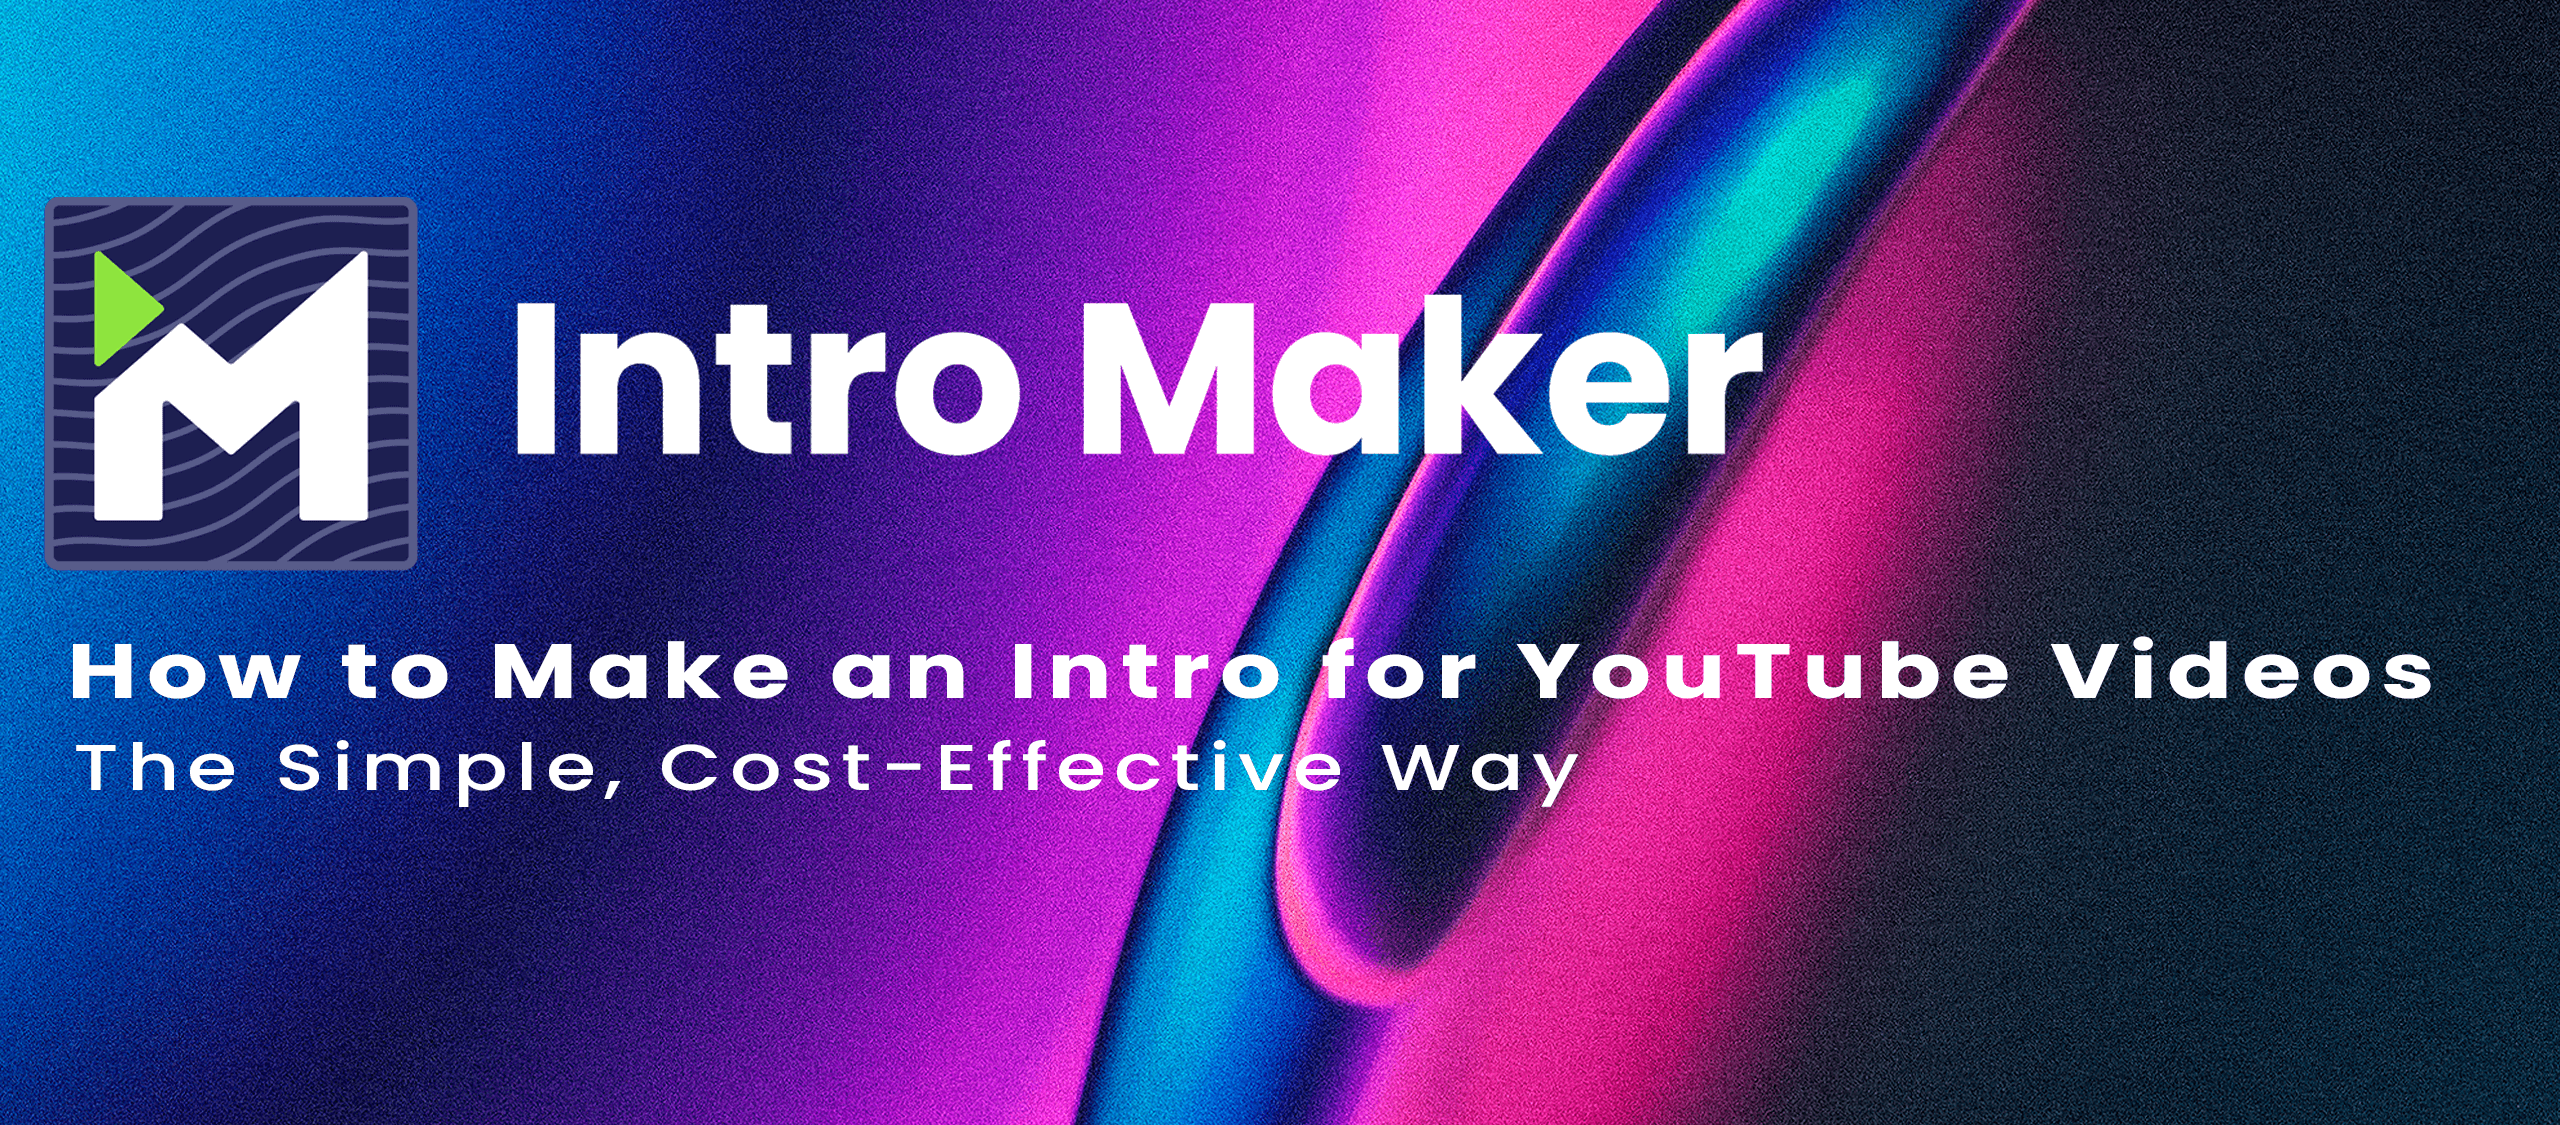 How to Make an Intro for YouTube Videos: the Simple, Cost-Effective Way